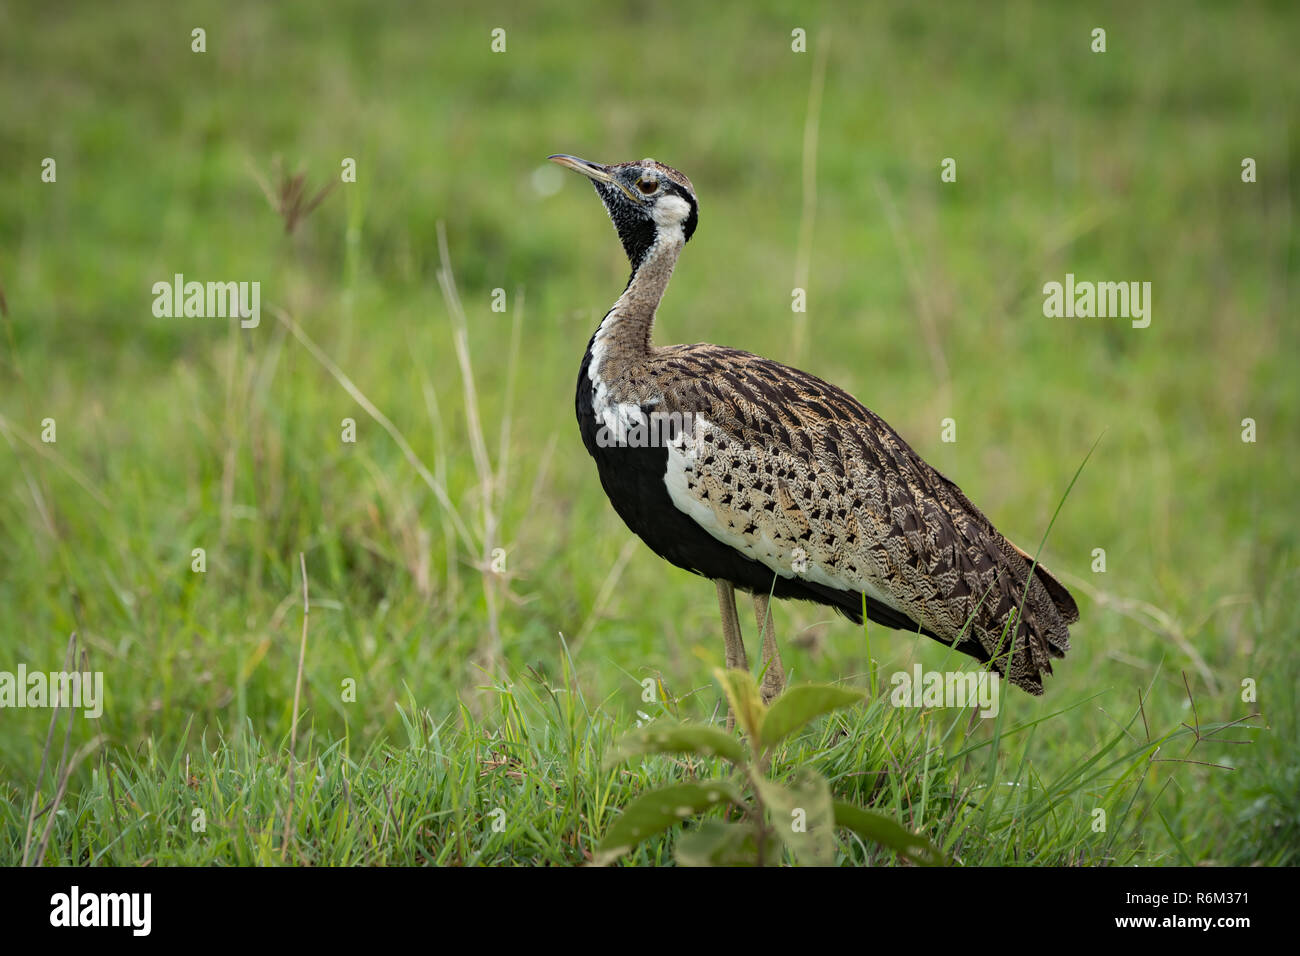 Black-bellied bustard with lifted head in grass Stock Photo